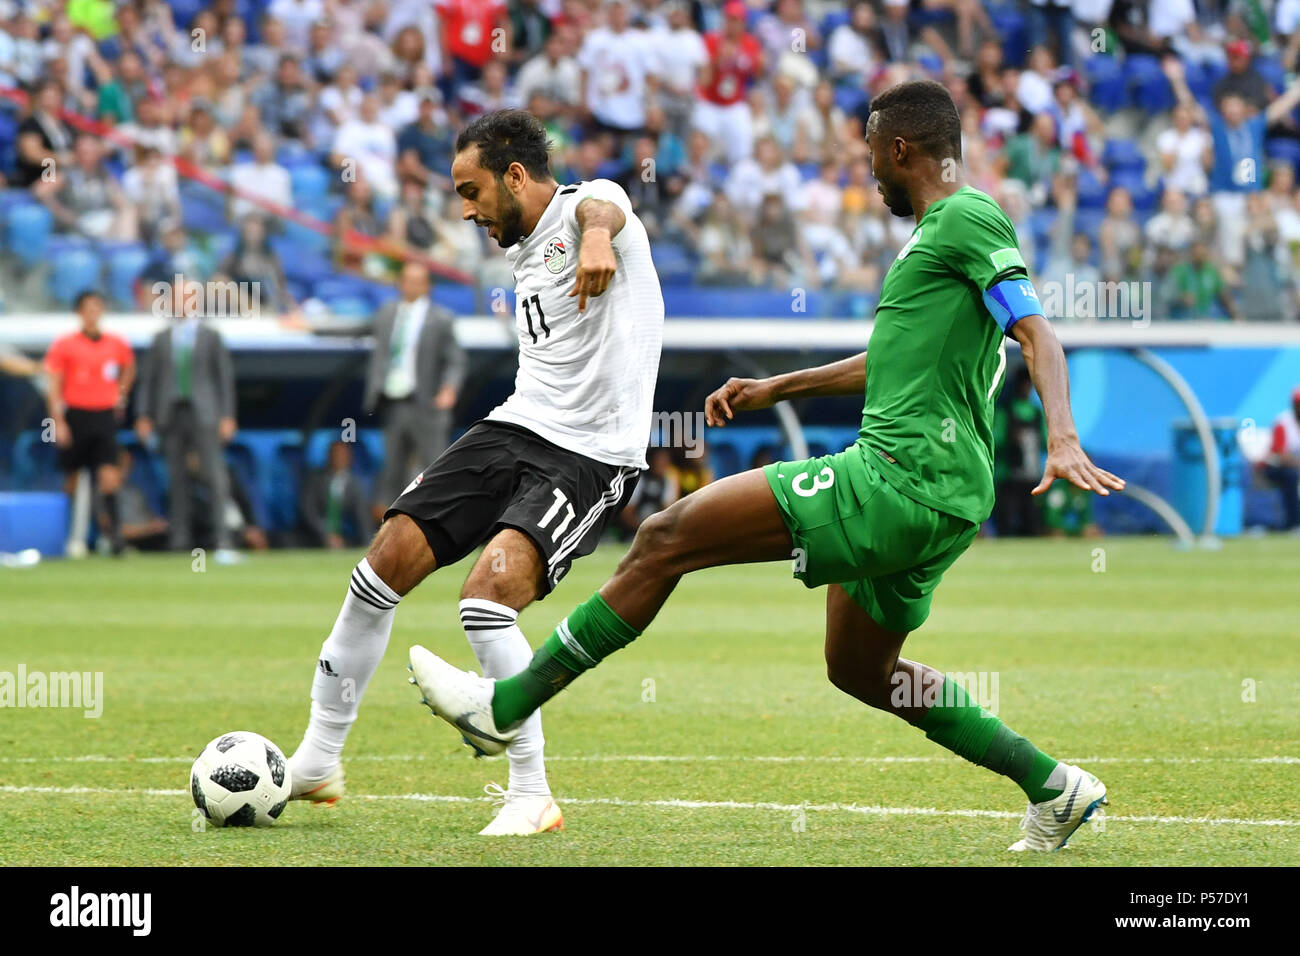 Volgograd, Russland. 25th June, 2018. KAHRABA (EGY), Action, duels versus Osama HAWSAWI (KSA). Saudi Arabia (KSA) Egypt (EGY) 2-1, Preliminary Round, Group A, Game 34, on 25.06.2018 in Volgograd, Volgograd Arena. Football World Cup 2018 in Russia from 14.06. - 15.07.2018. | usage worldwide Credit: dpa/Alamy Live News Stock Photo